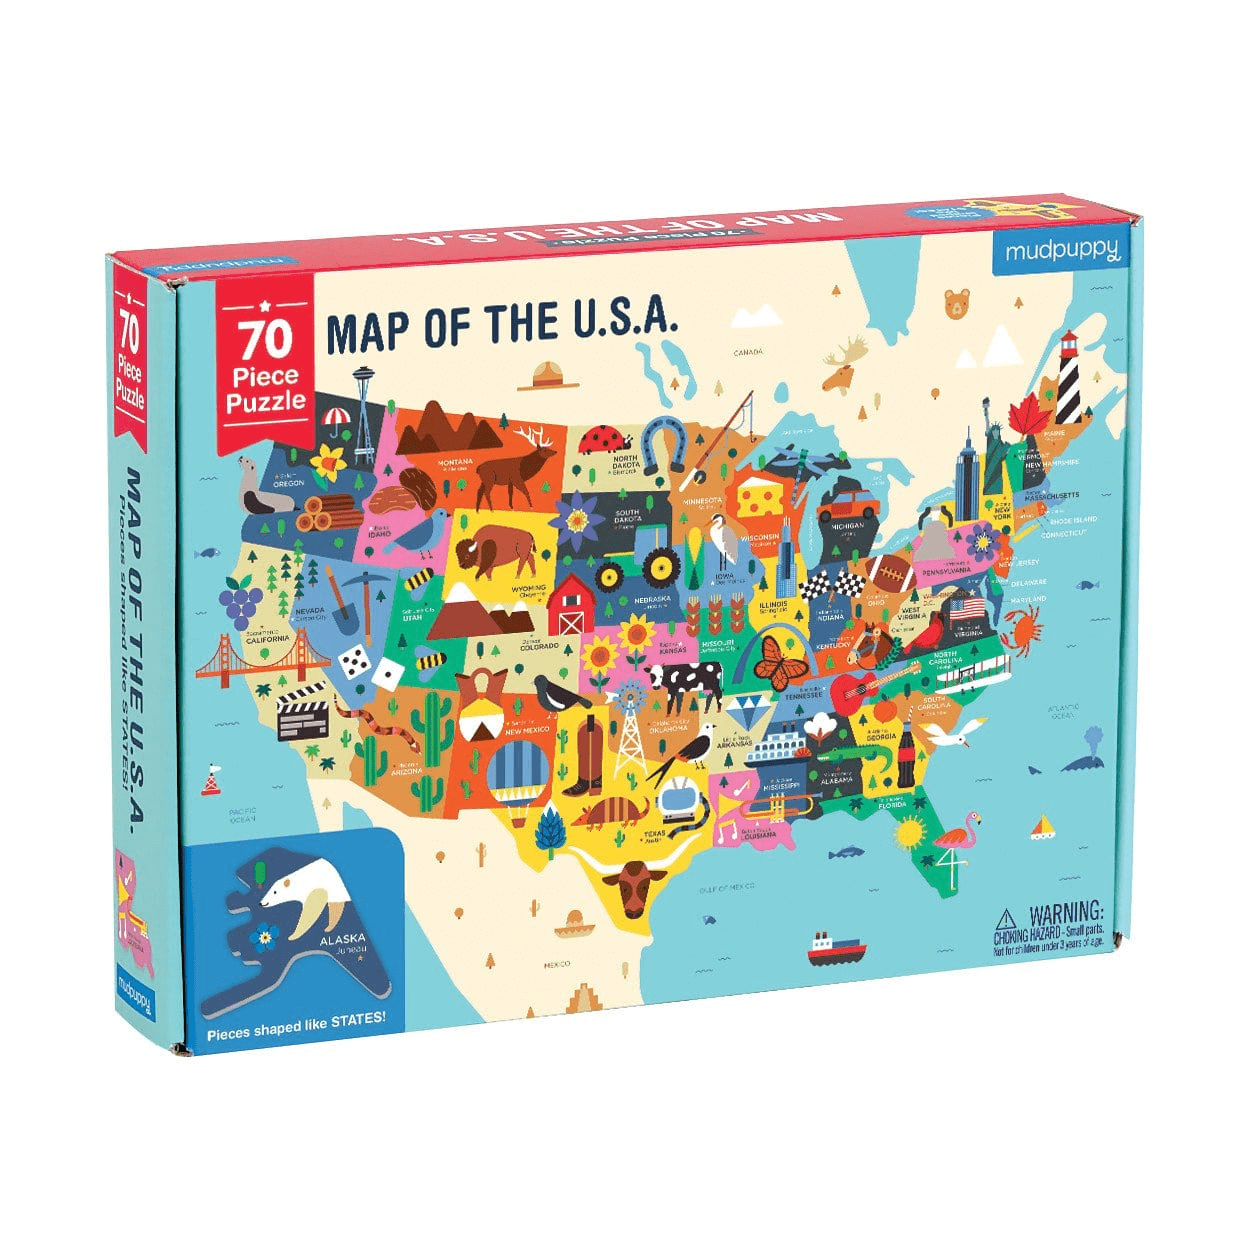 map of the usa - 70 piece puzzle